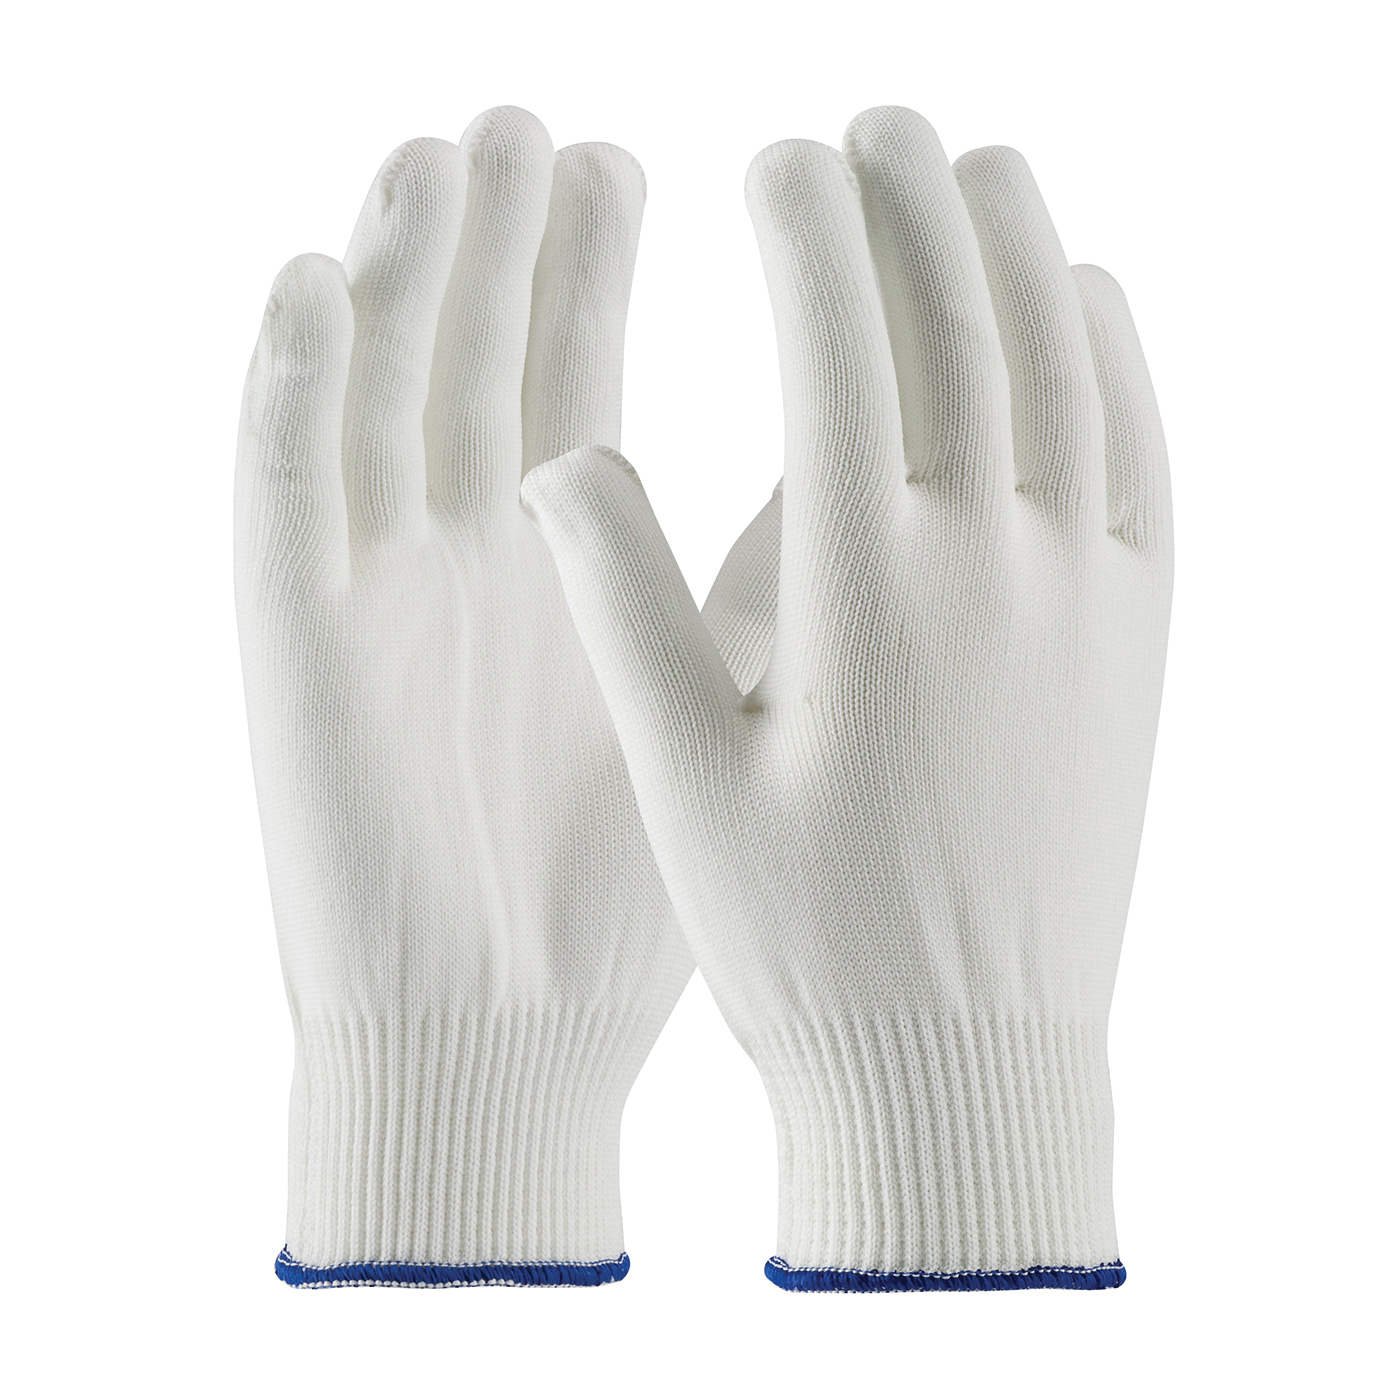 PIP® CleanTeam® 40-230L Lightweight General Purpose Gloves, Clean Environment, L, Polyester Palm, 13 ga Polyester, White, Knit Wrist Cuff, Uncoated Coating, Resists: Abrasion and Cut, Polyester Lining, Seamless Knit